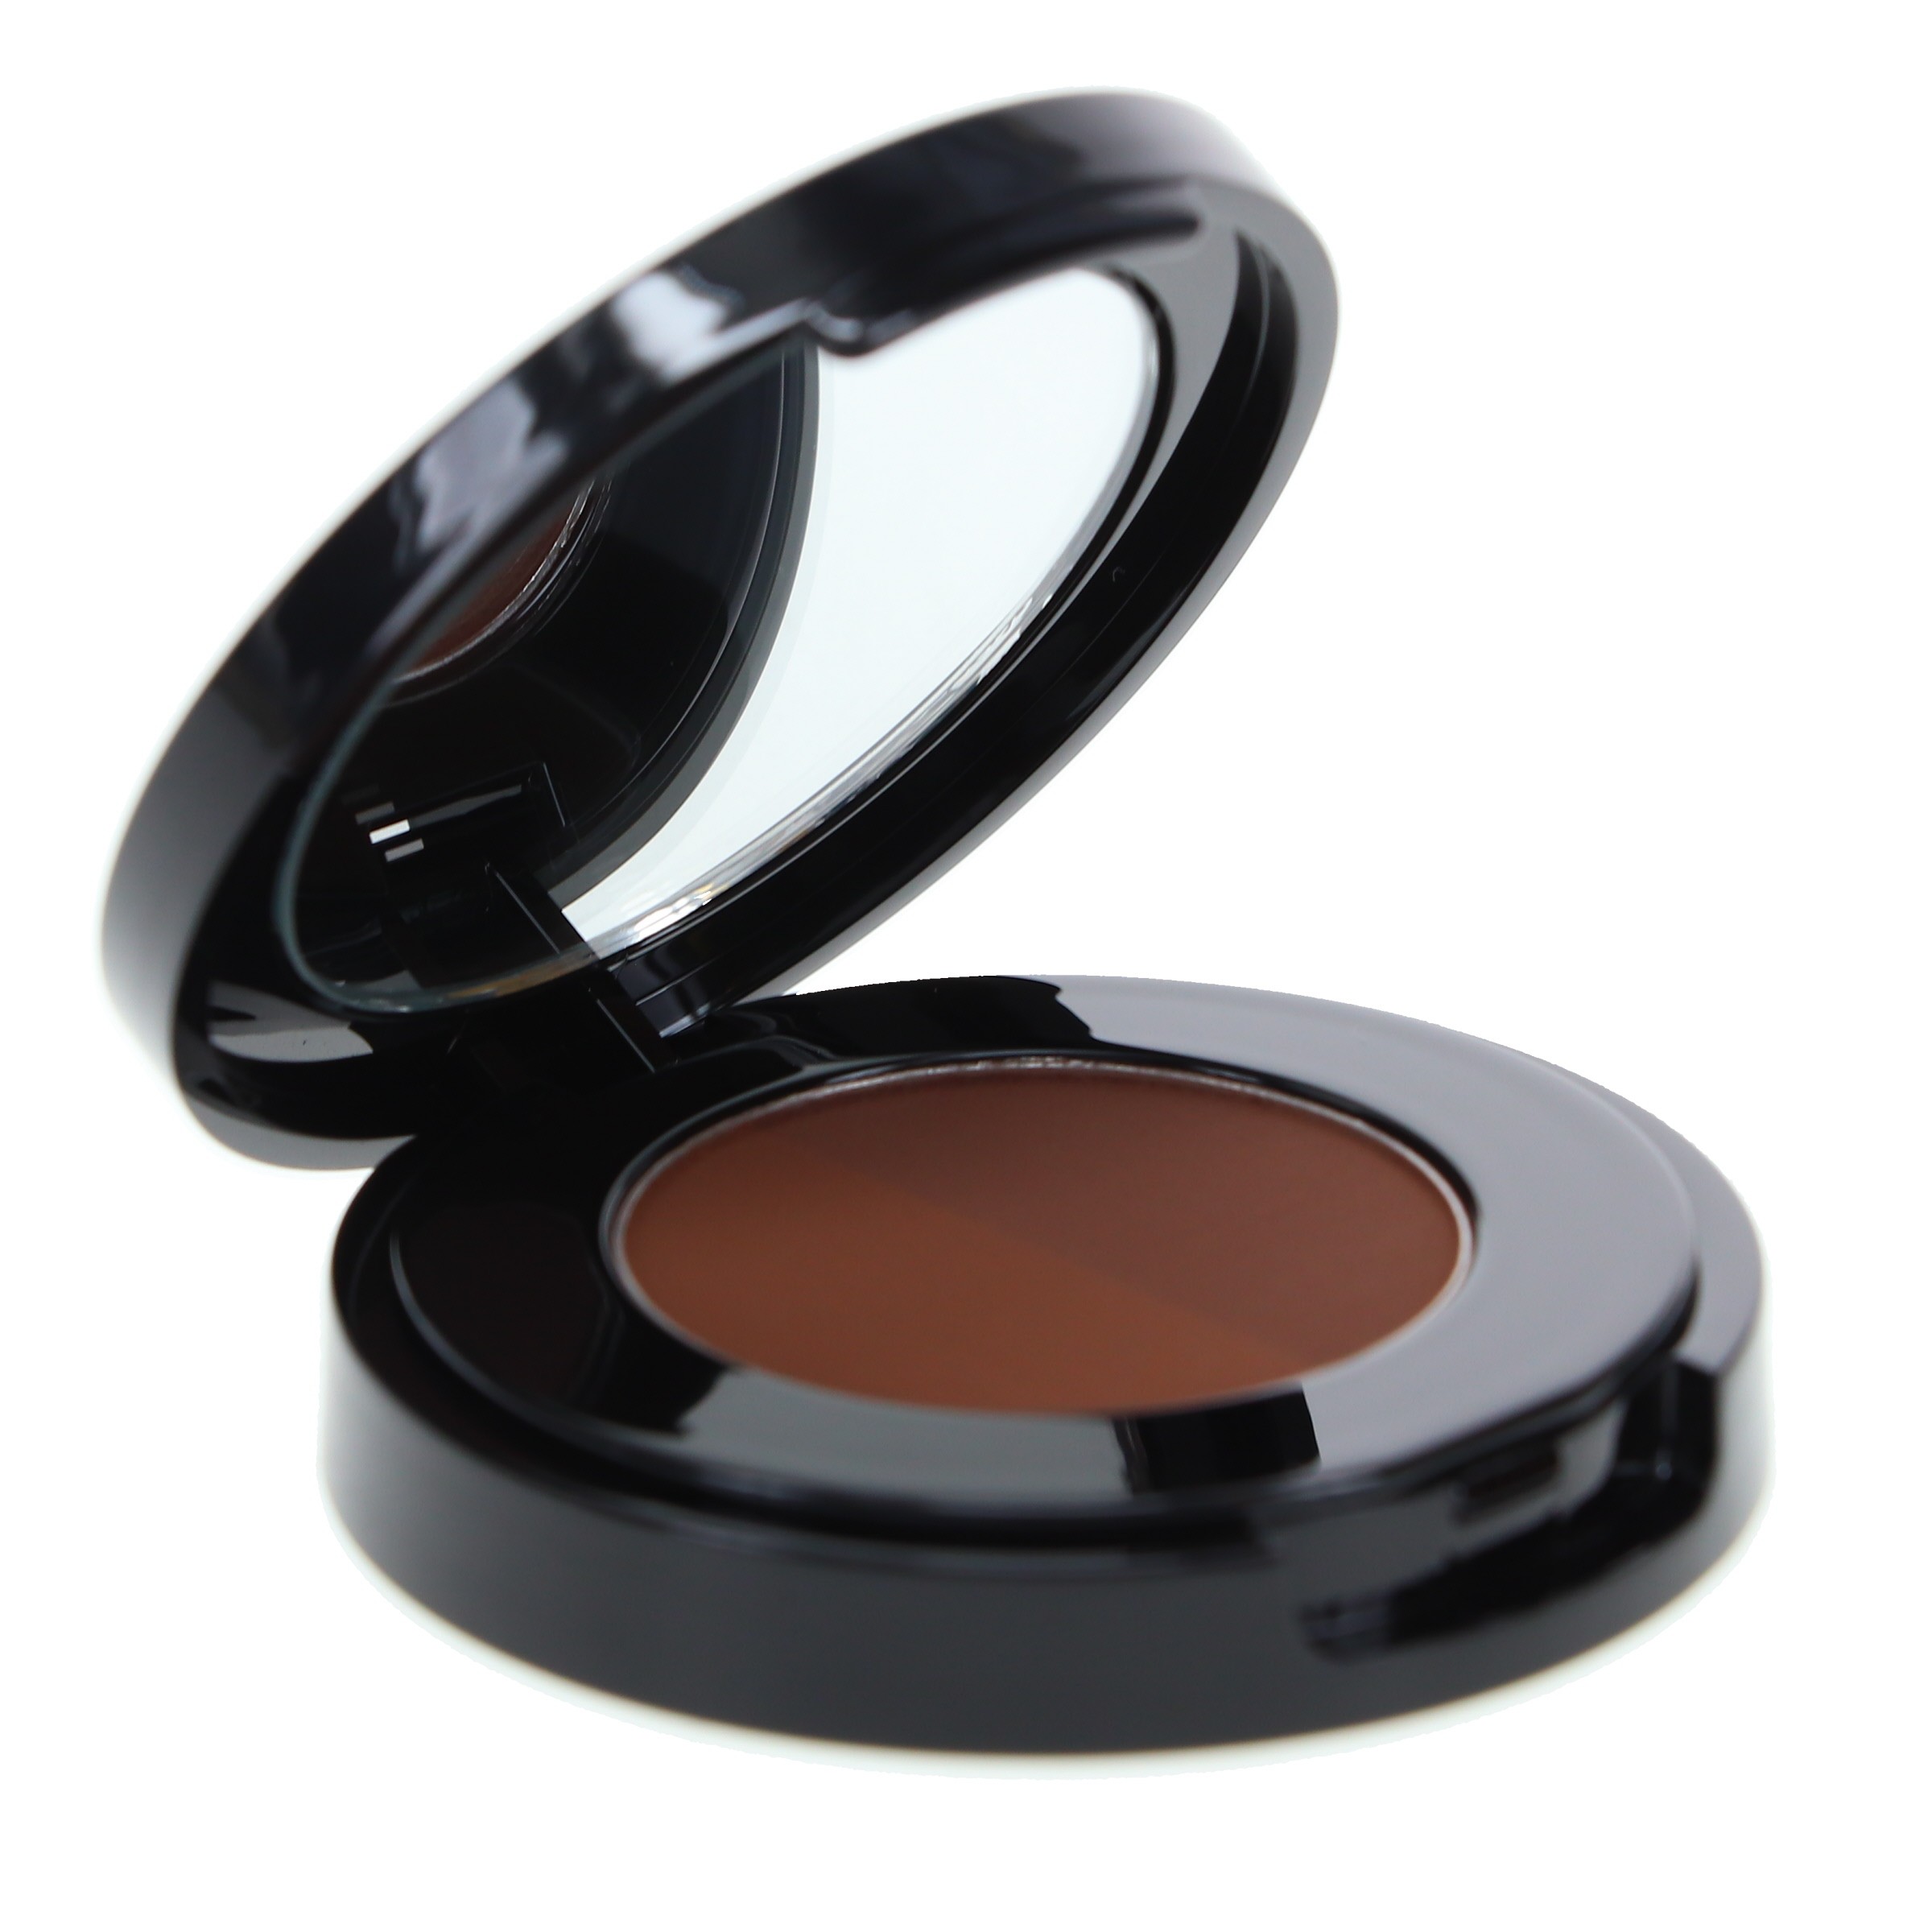 Anastasia Beverly Hills Brow Powder Duo Ebony 0.03 oz ~ Beauty Roulette | Augenbrauen-Make-Up